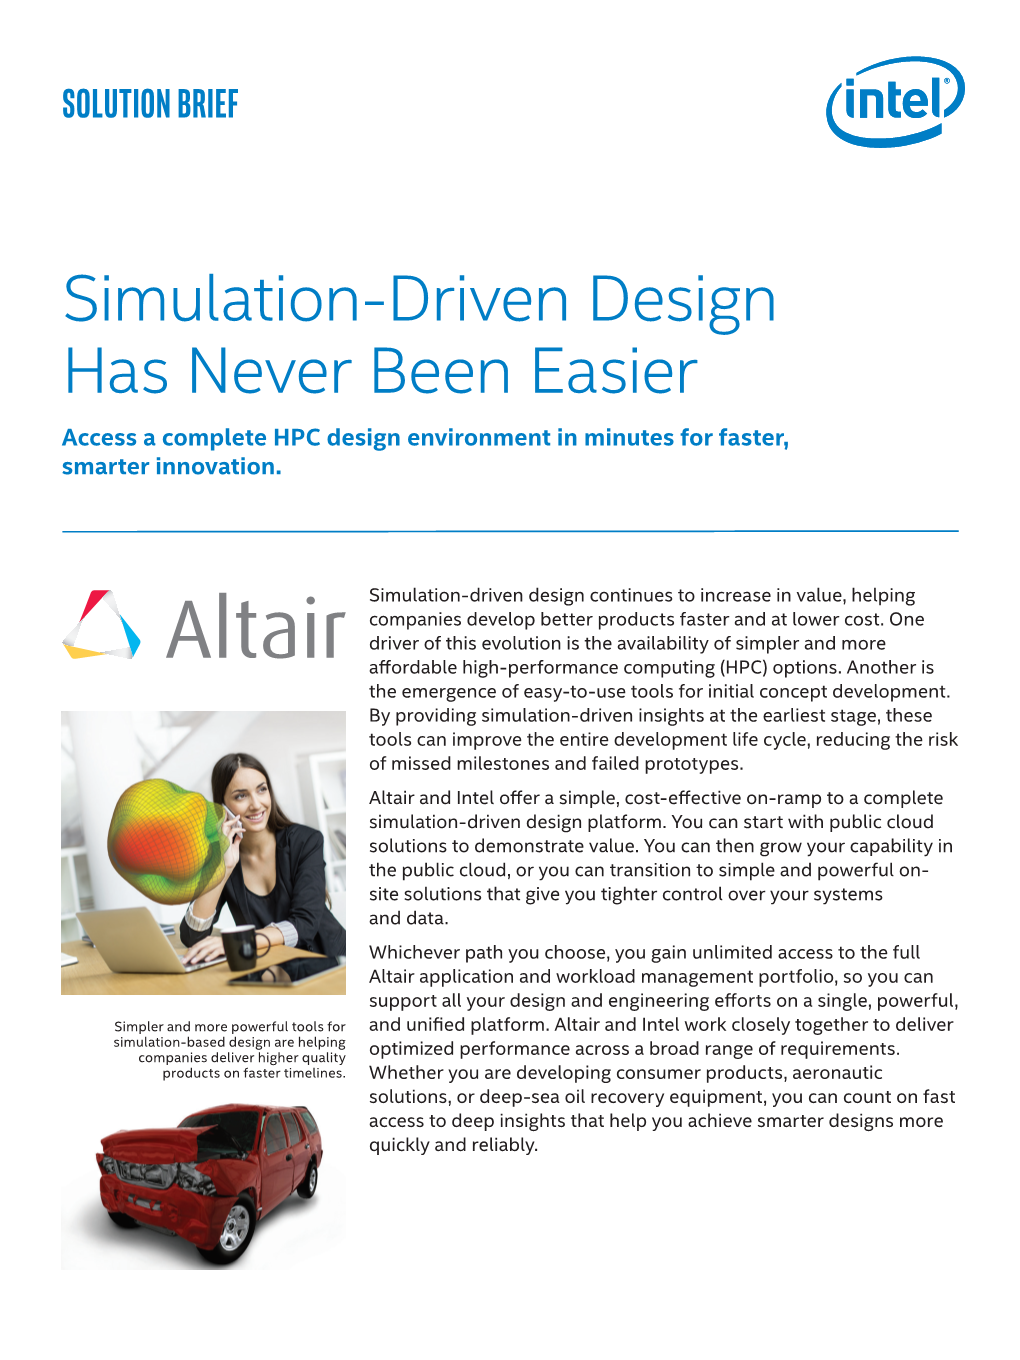 Simulation-Driven Design Has Never Been Easier Access a Complete HPC Design Environment in Minutes for Faster, Smarter Innovation